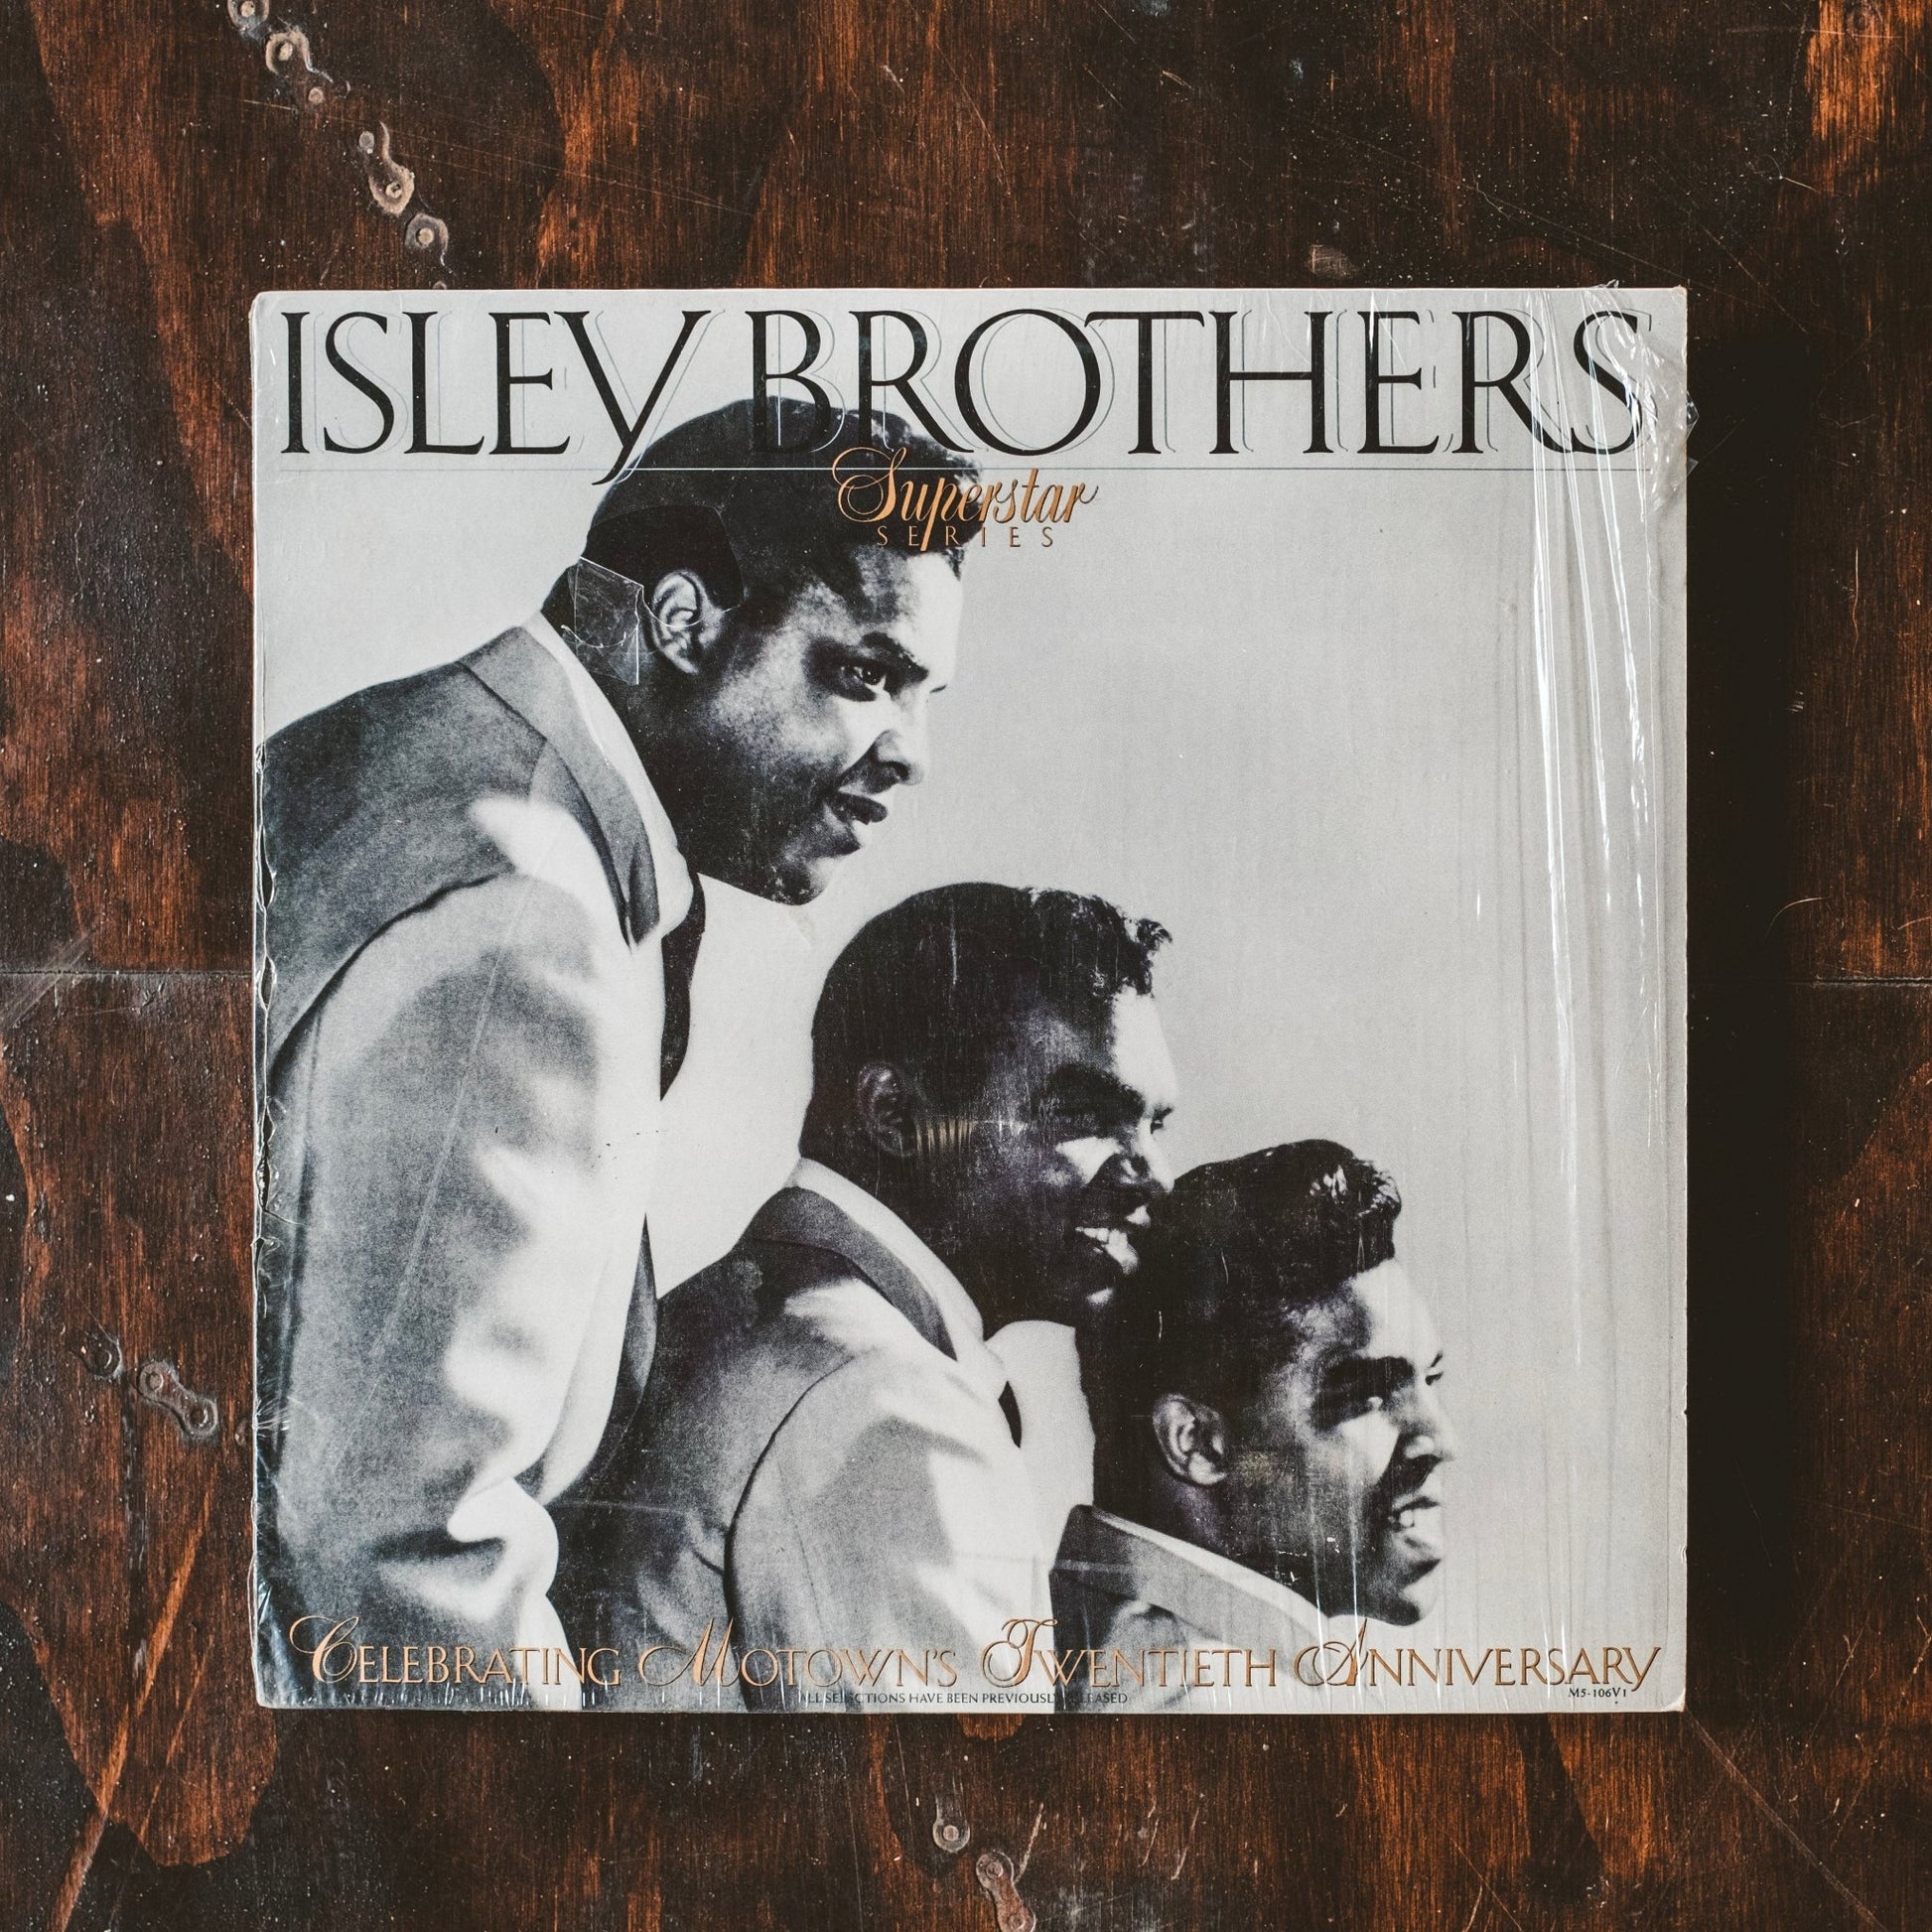 Isley Brothers - Smooth Sailin' (Pre-Loved) - VG-Isley Brothers, The - Superstar - LP's - Yellow Racket Records